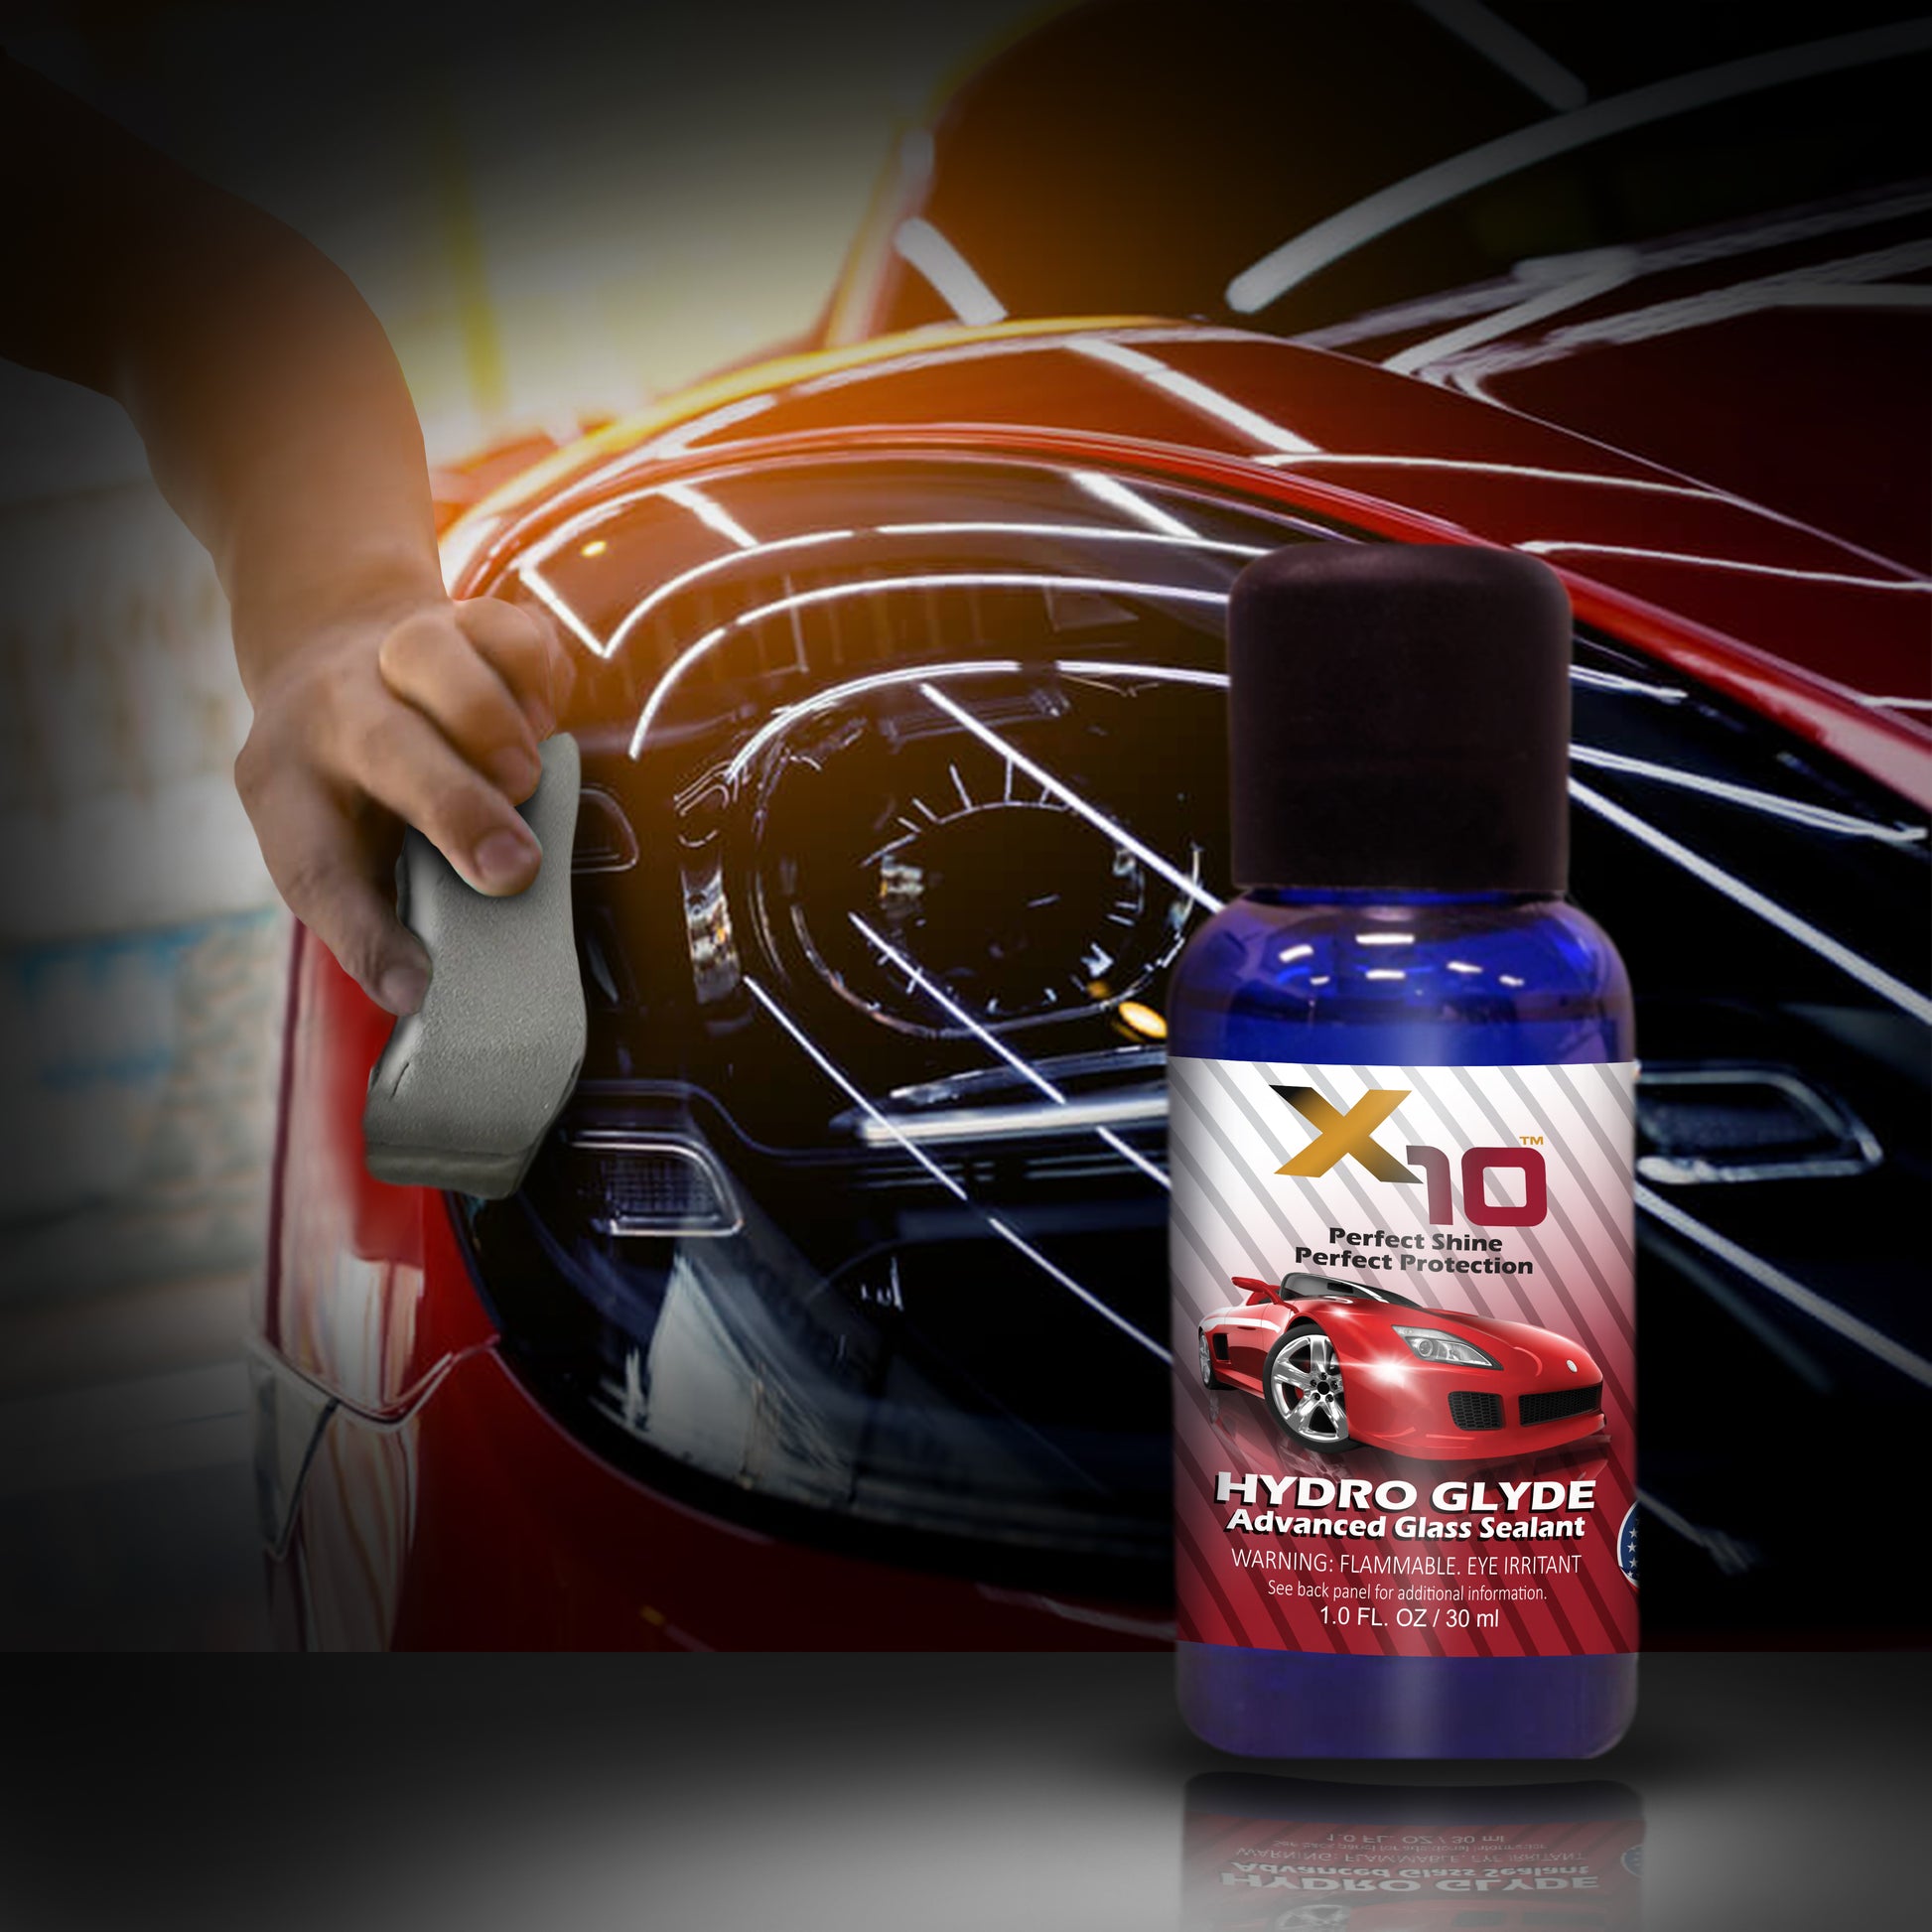  X10 Hydro Glyde Hydrophobic Glass Coating (30 ml) - No Cure  Time, Windshield and Glass Sealant for up to 6 mos of Protection, Water  Repellant & Anti Fog